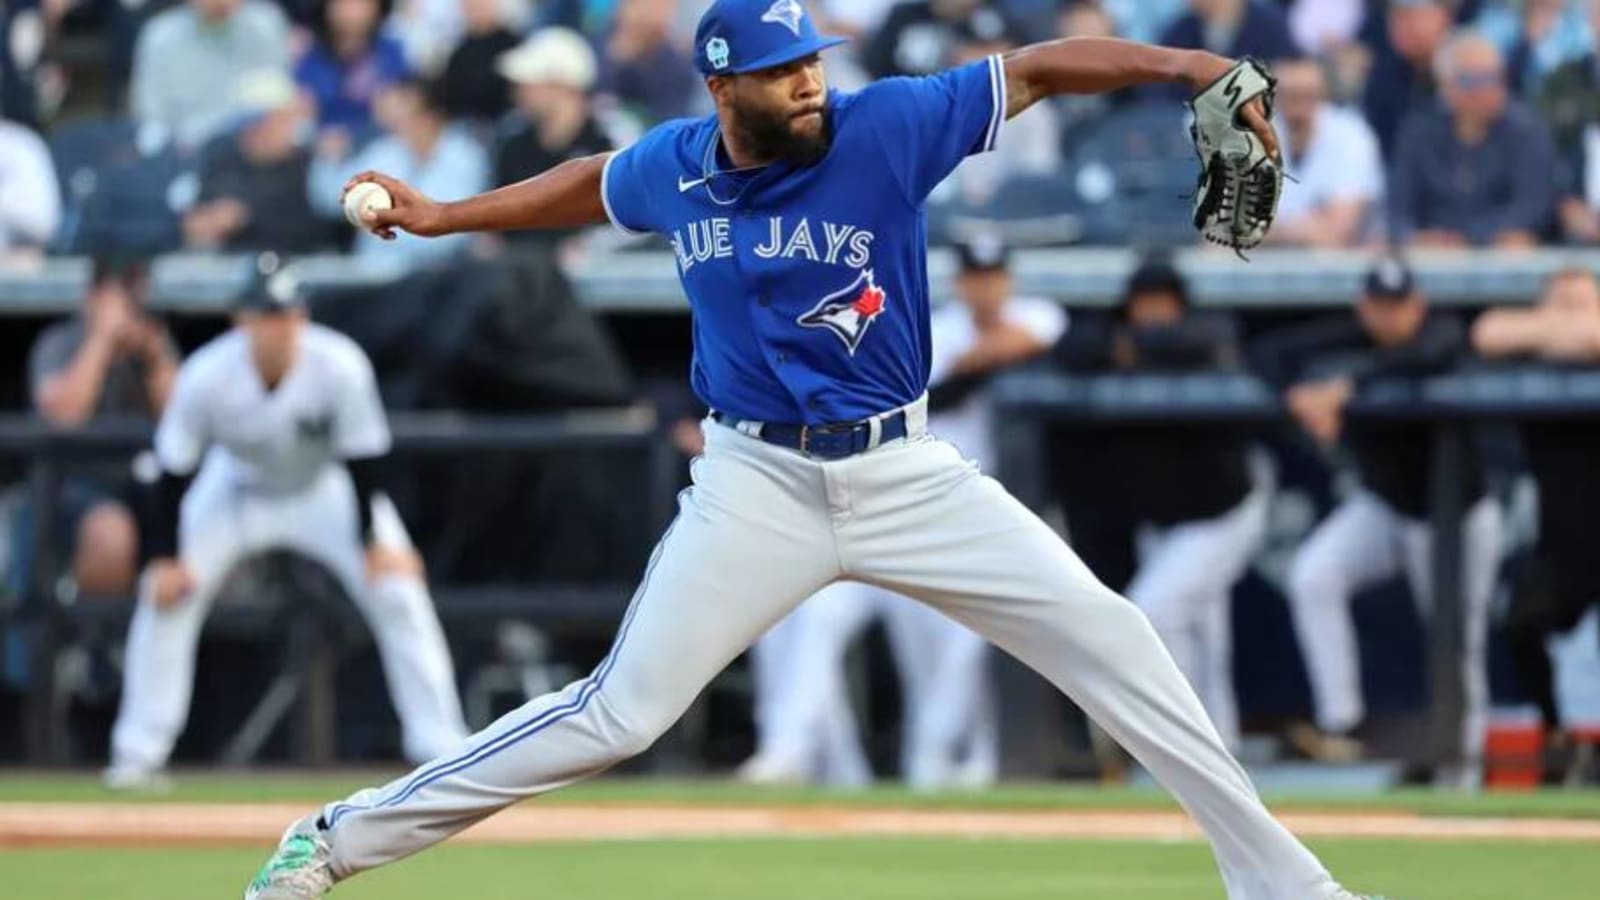 Getting to know Jay Jackson: His time in the minor leagues, the decision to sign with the Blue Jays, and more